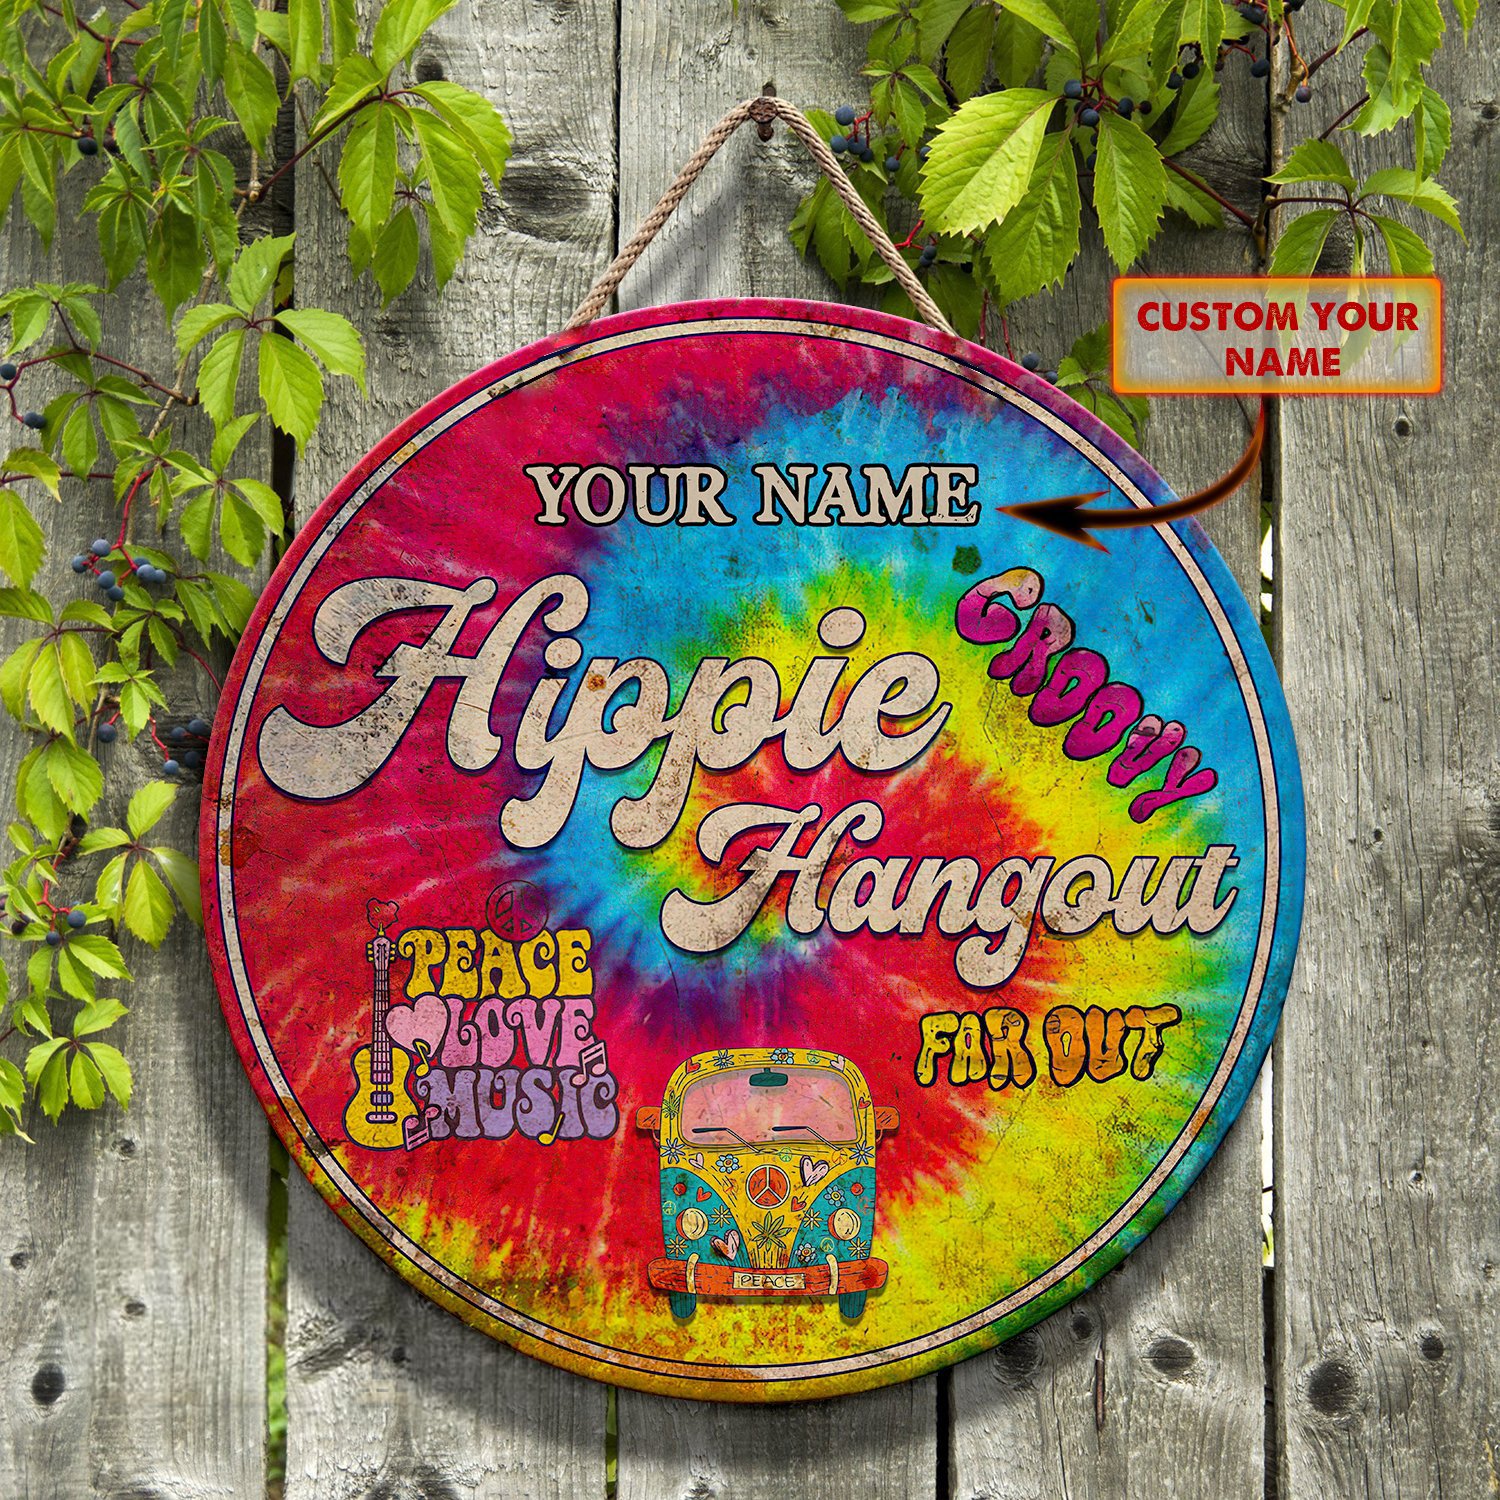 Hippie hangout peace love music far out custom name wooden sign